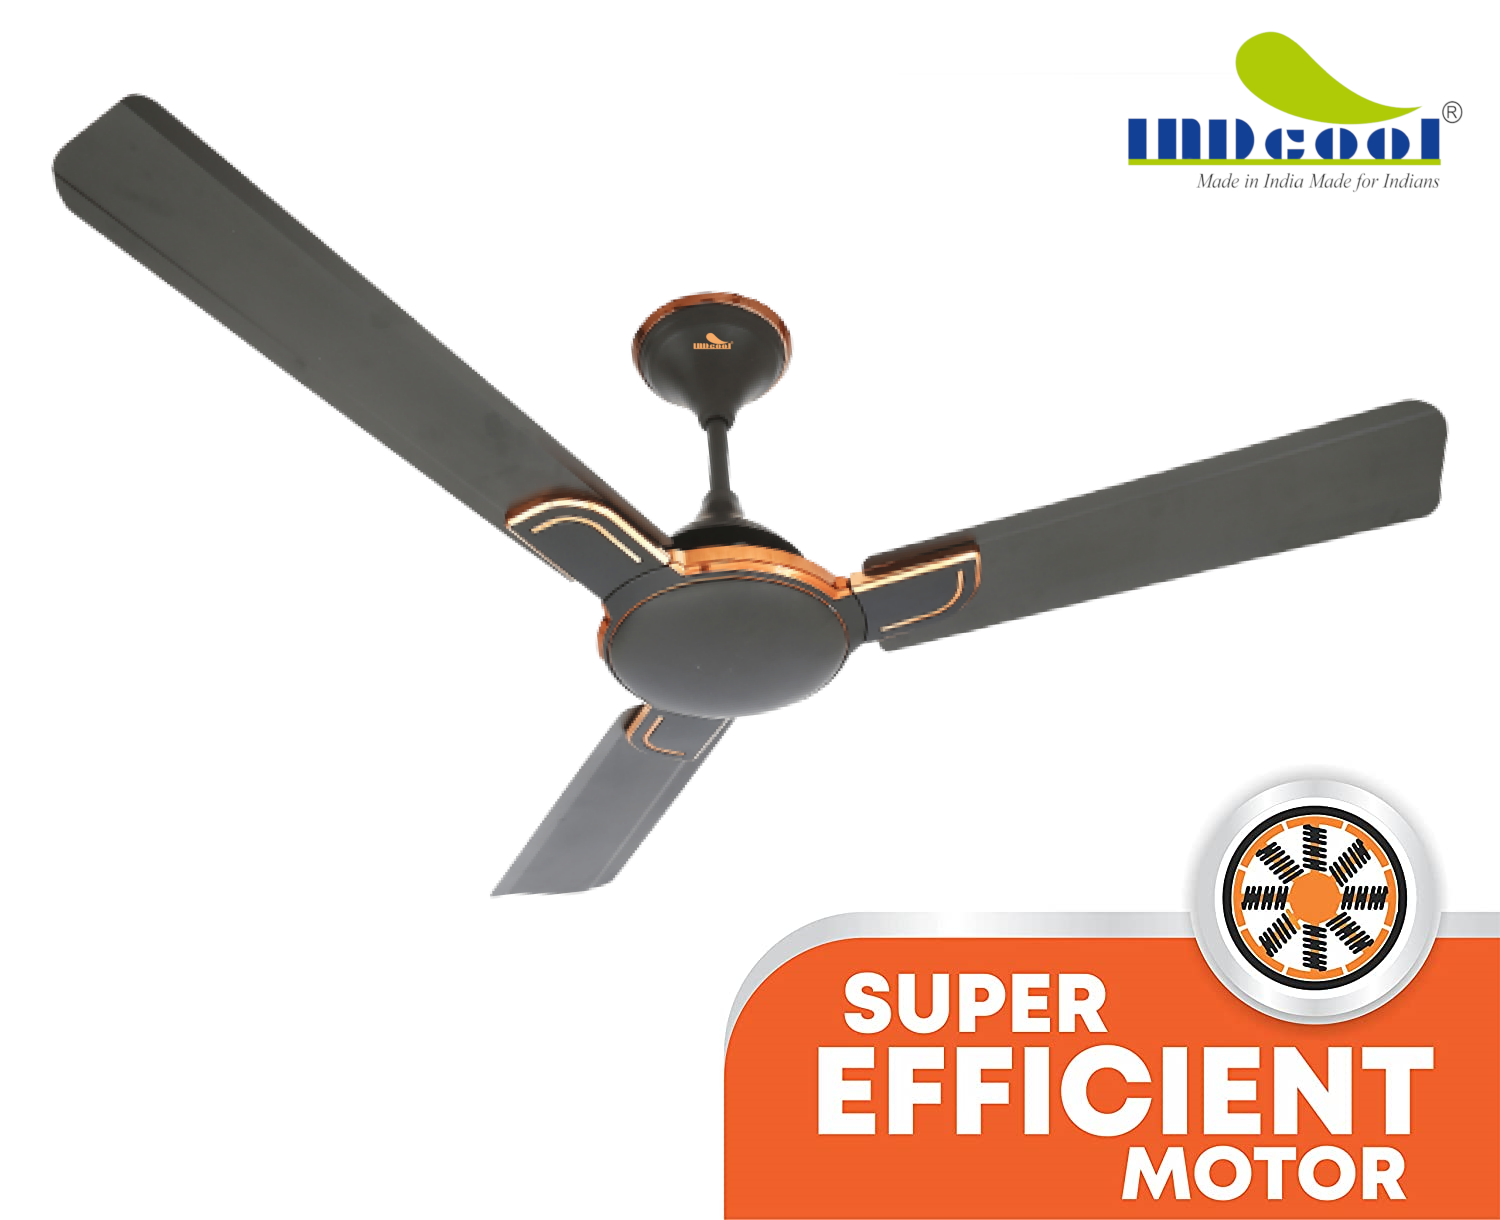 "INDcool Premium Ceiling Fan - Elegantly designed with premium finish, advanced motor technology, and remote control for a perfect blend of style and performance."